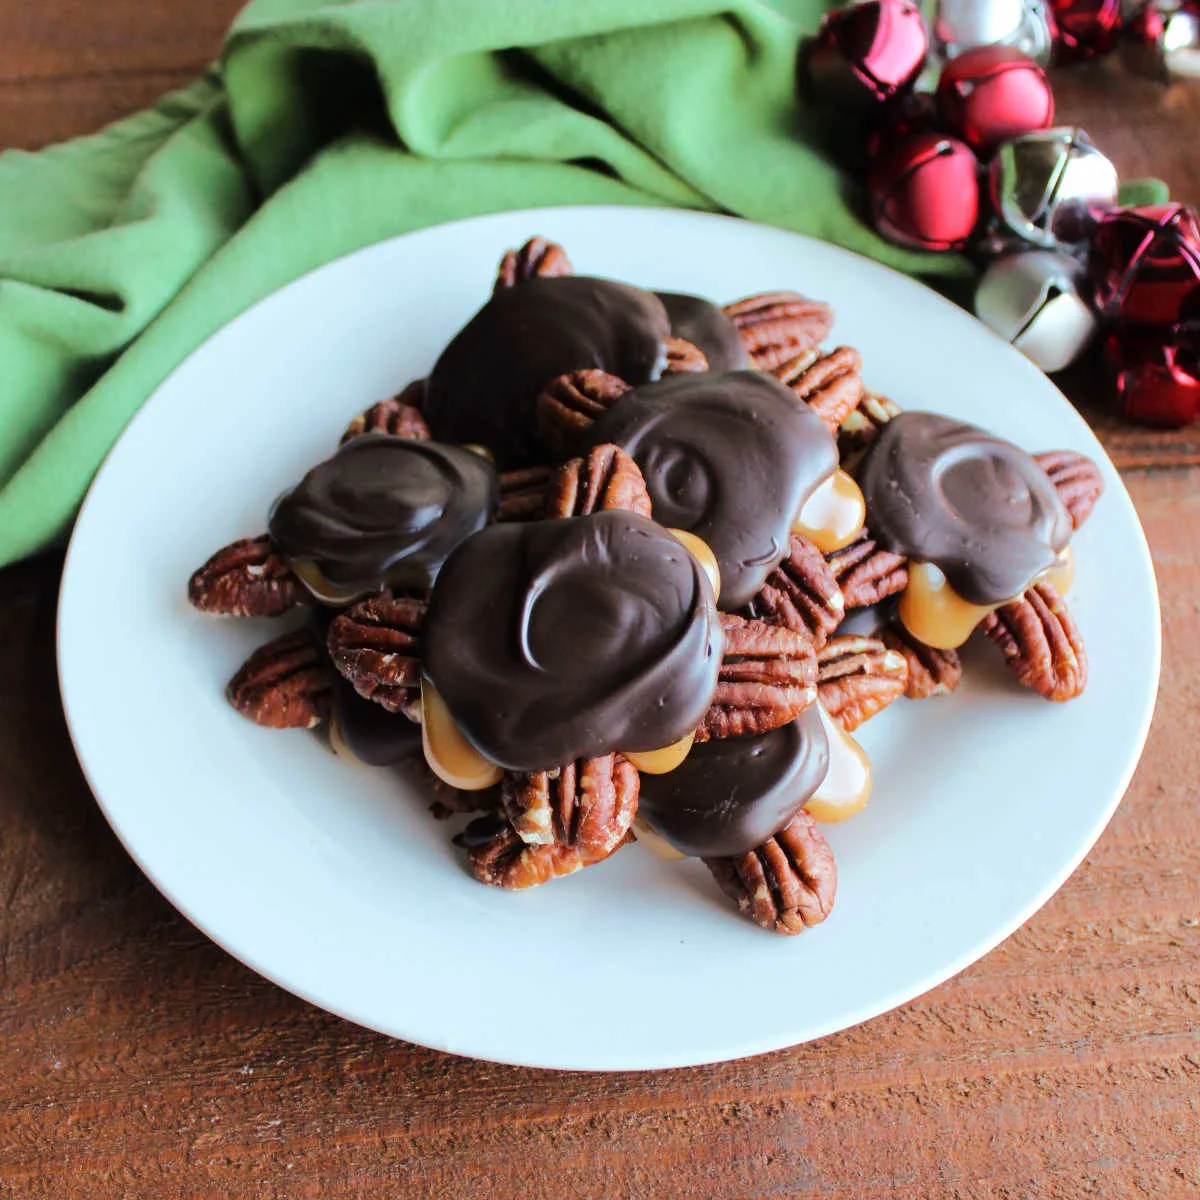 Plate of homemade turtles with pecans, soft homemade caramel, and dark chocolate.